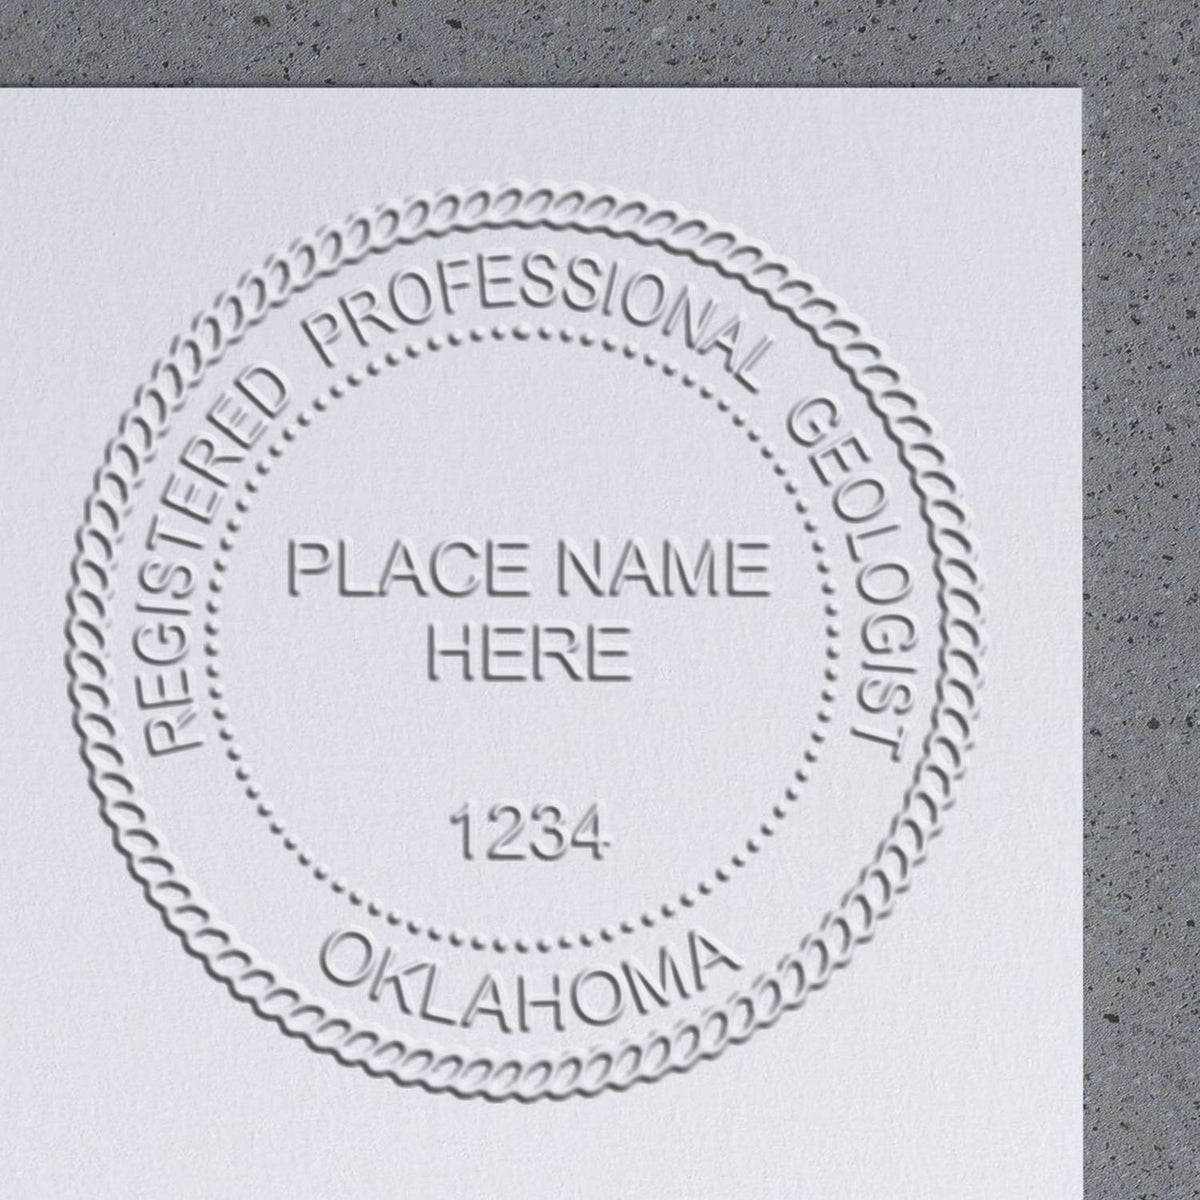 Another Example of a stamped impression of the Handheld Oklahoma Professional Geologist Embosser on a office form